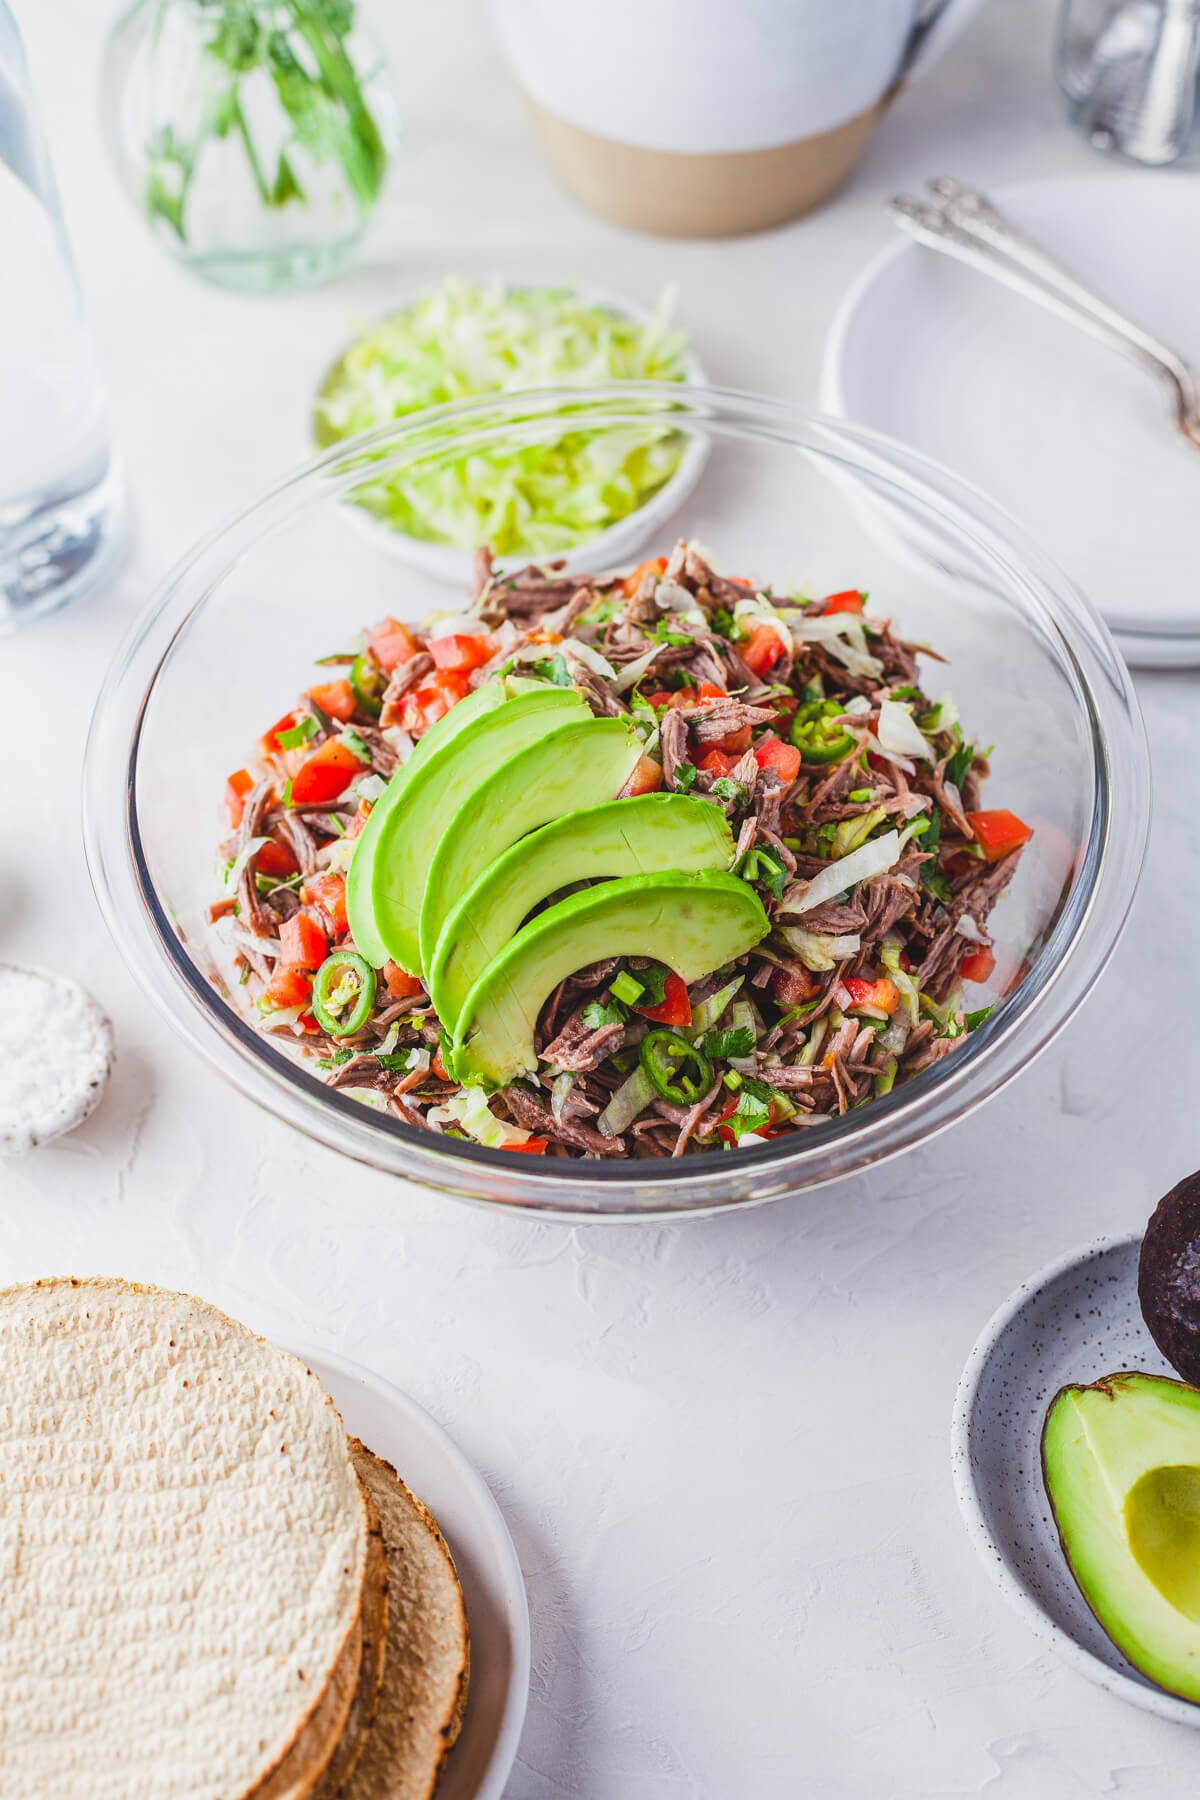 A glass bowl filled with brightly coloured Salpicón (Mexican Shredded Meat Salad) topped with sliced avocado.